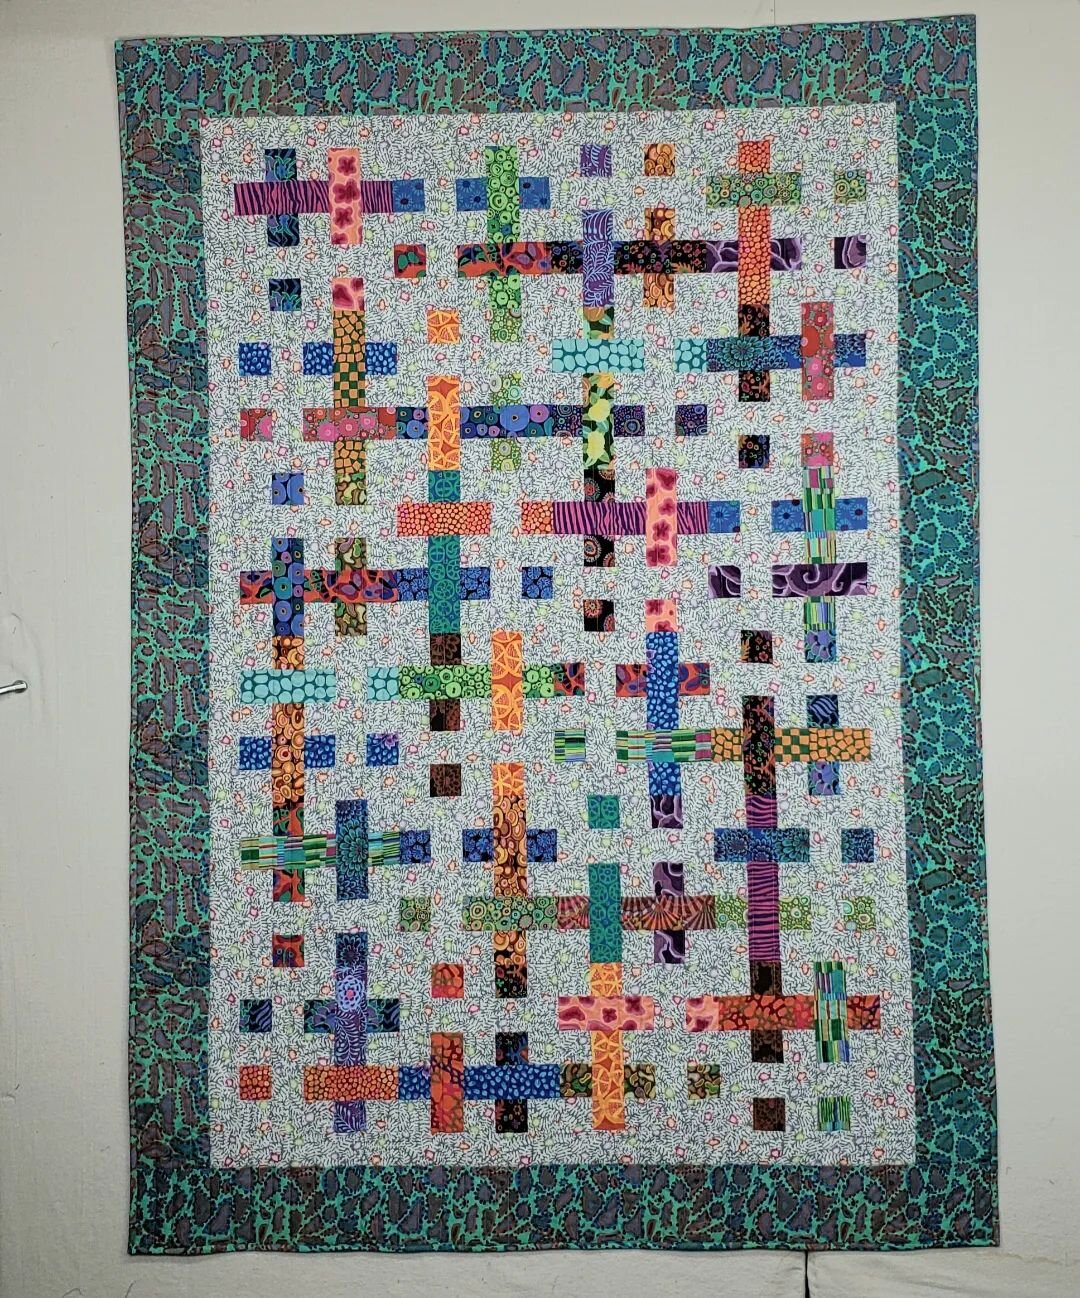 I finished my Matrix quilt. Pattern by @springleafstudios .  All Kaffe Fassett collective fabrics. 52&quot; x 73&quot;. The back and binding are the same fabric as the border.

#kaffefassettfabrics 
#kaffefassettfabric 
#kaffefassettcollective